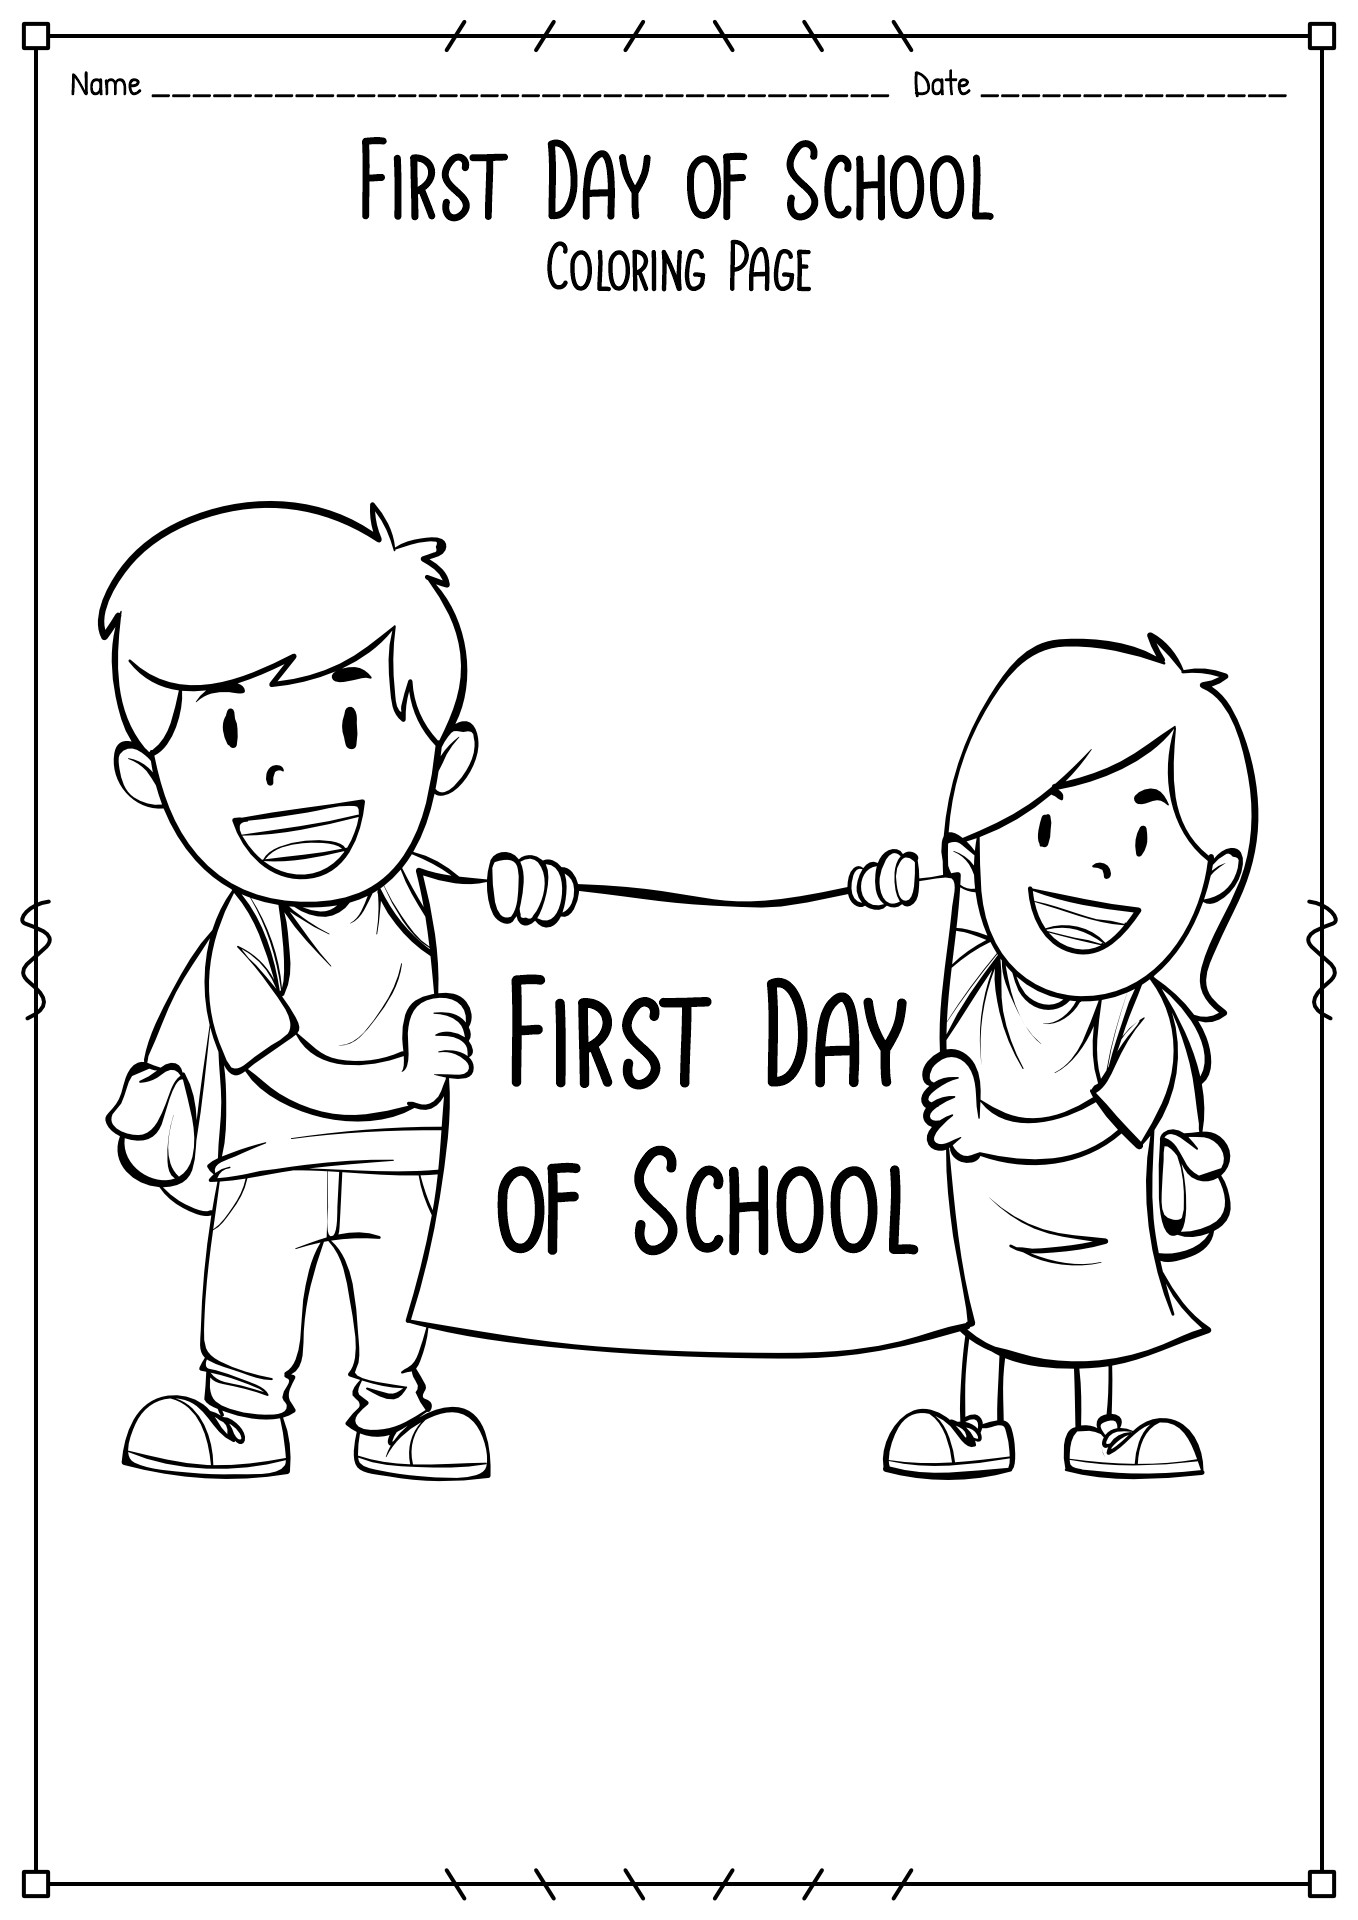 My First Day of School Coloring Page